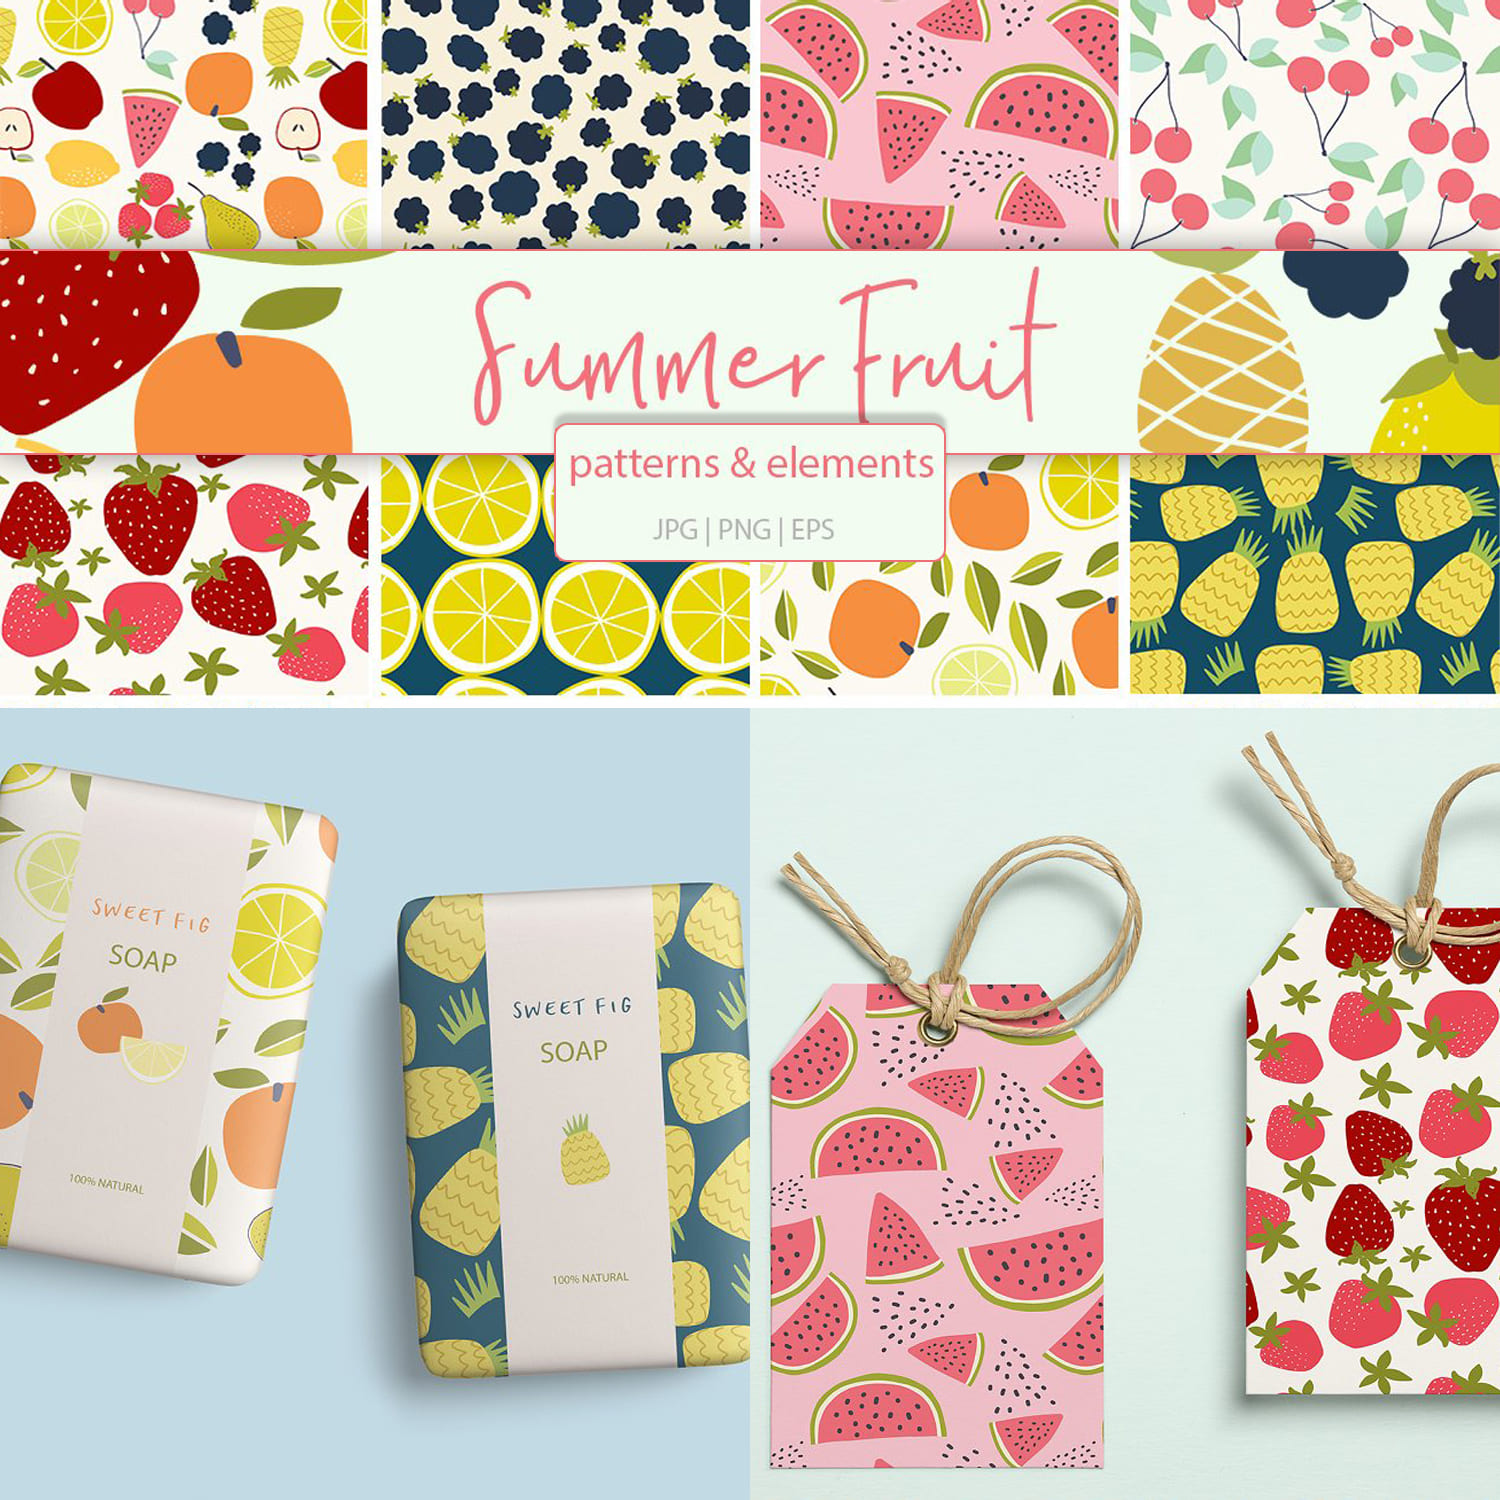 summer fruit patterns and elements graphics.